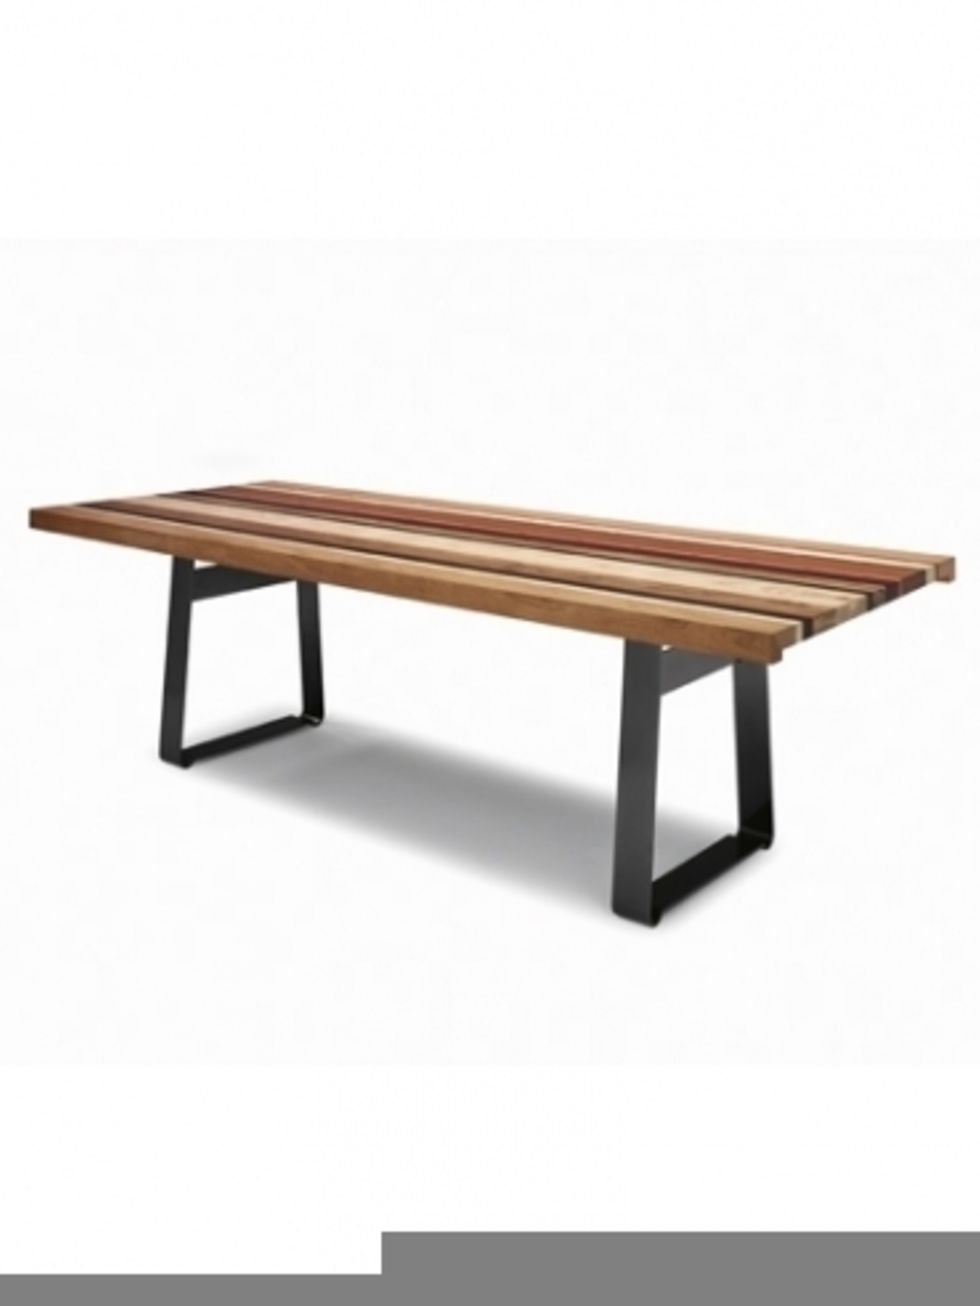 Wood, Table, Hardwood, Furniture, Line, Wood stain, Rectangle, Tan, Plywood, Parallel, 